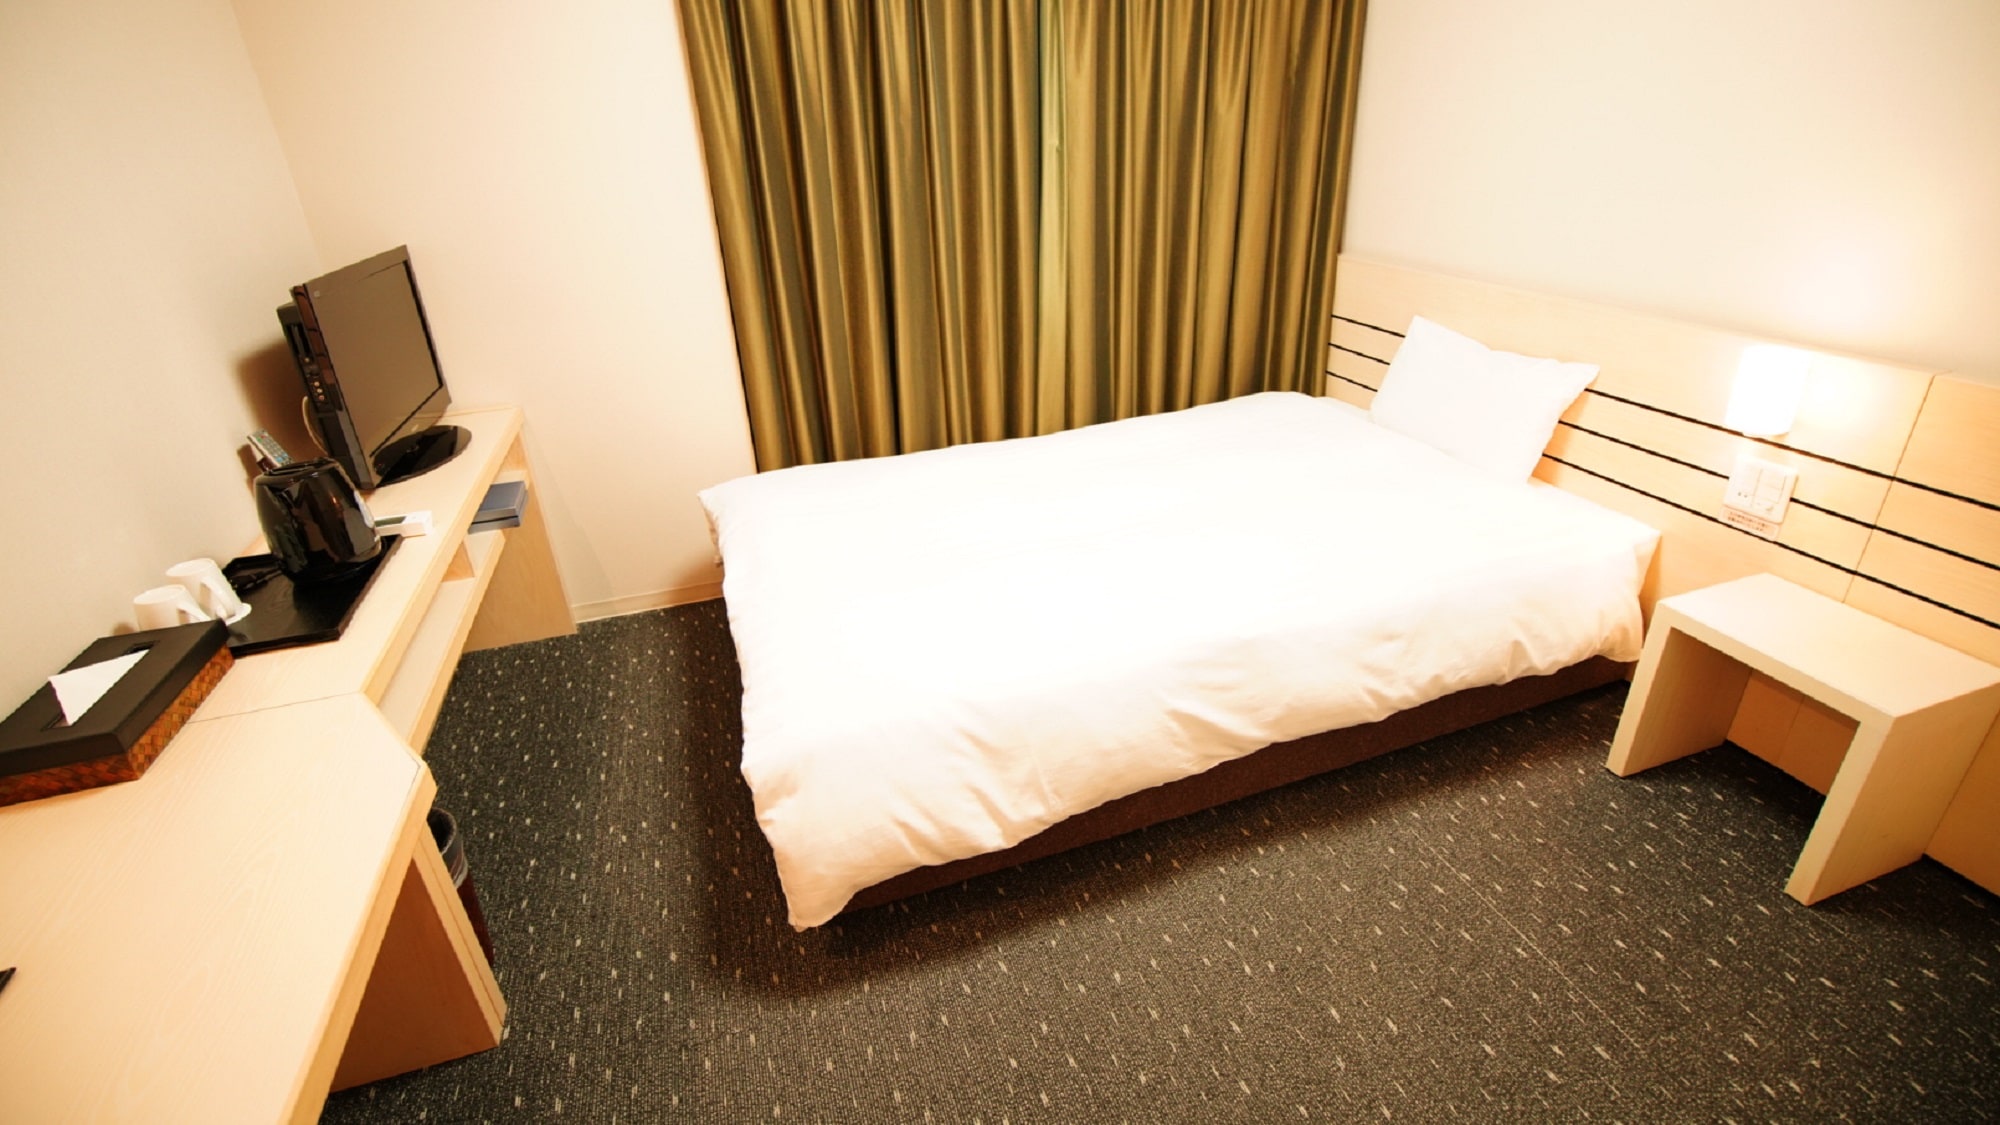 ◆ Single room (semi-double room) 15.0㎡ ～ 16.8㎡ Bed size: 120cm & times; 195cm